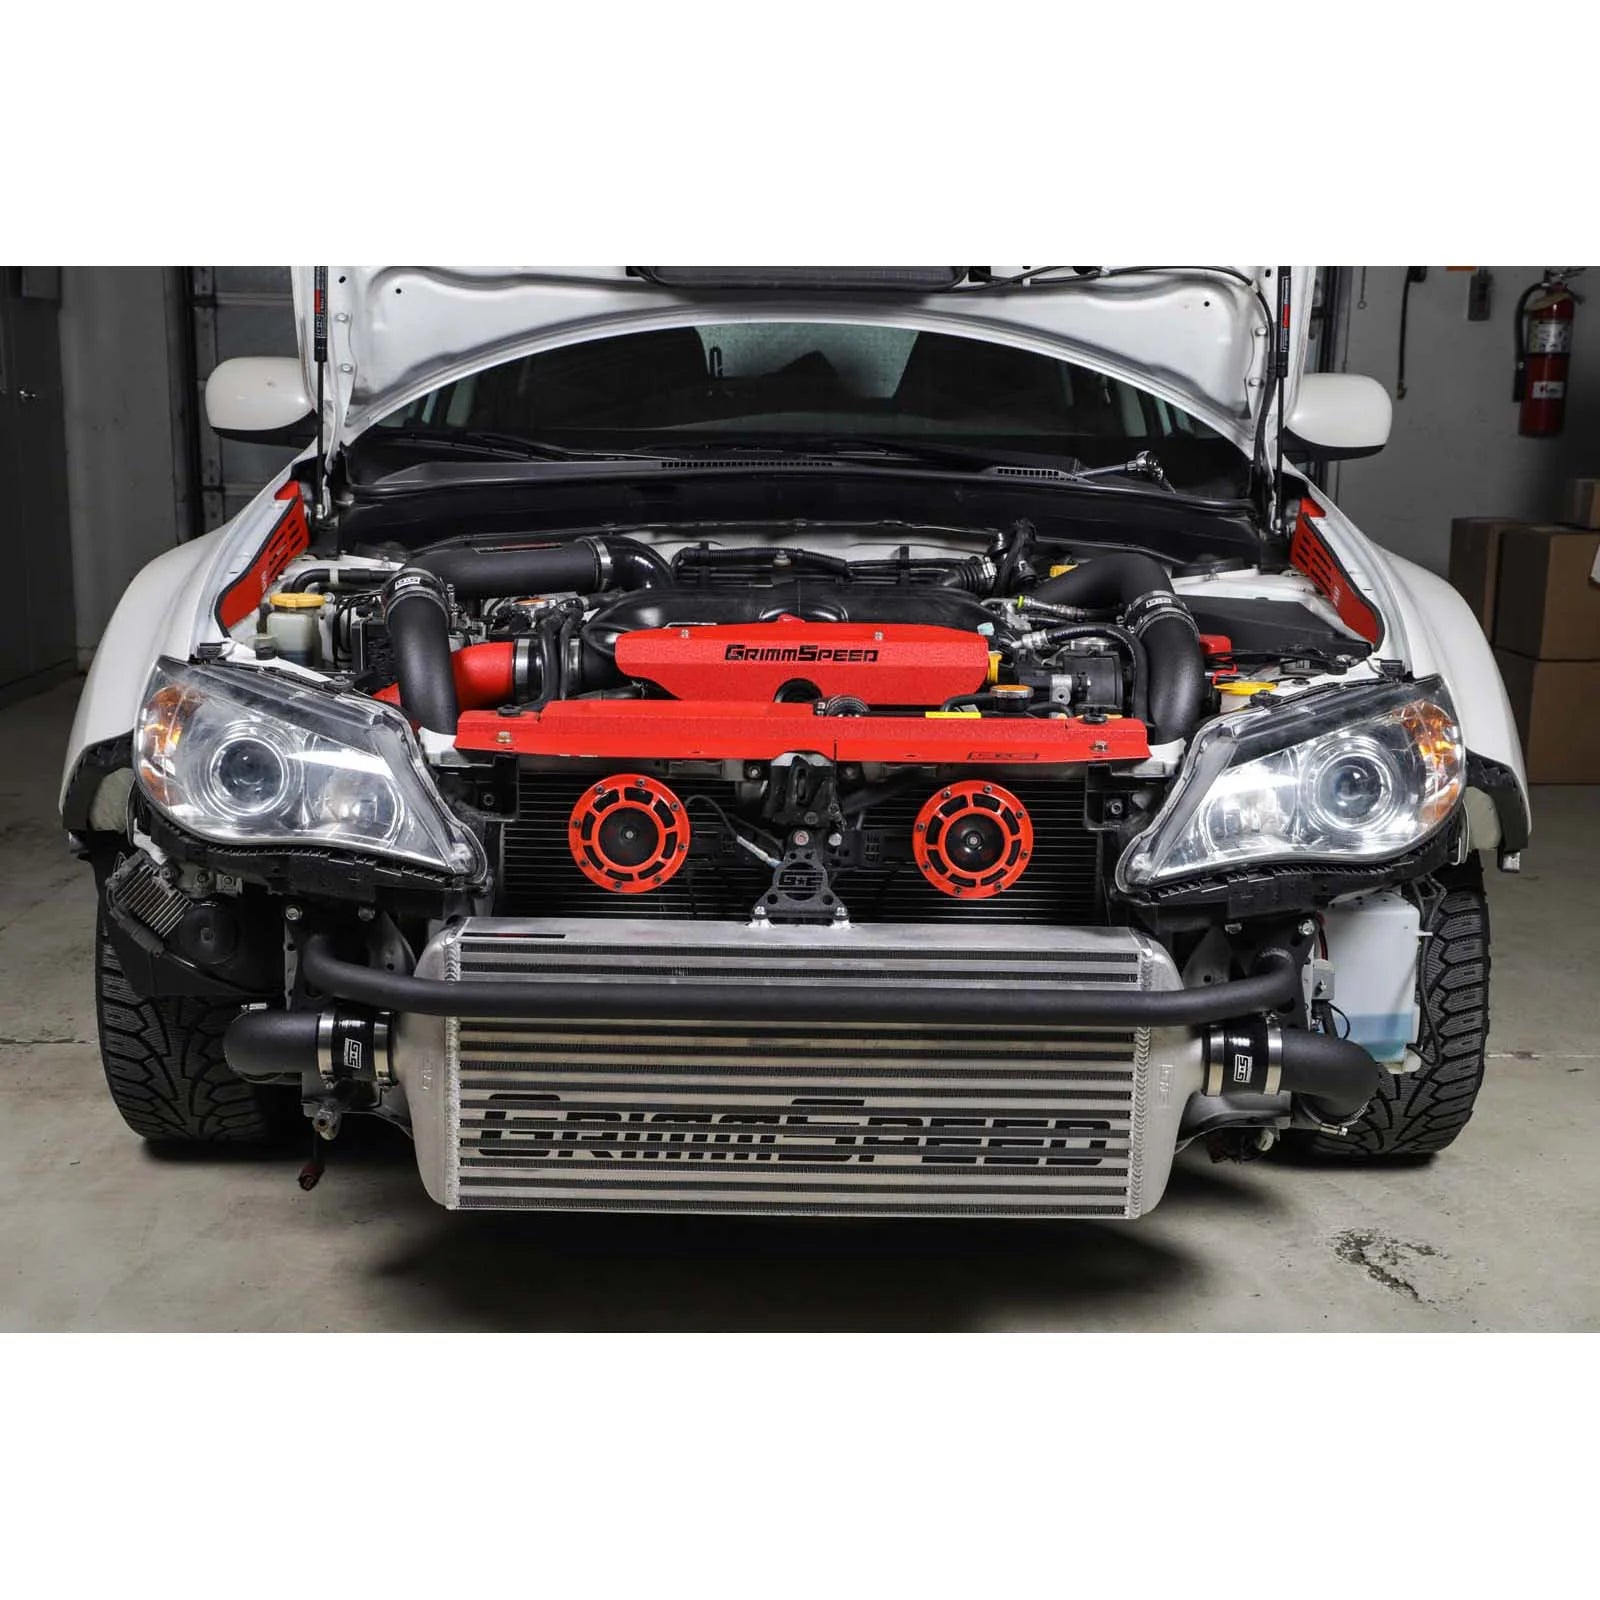 GrimmSpeed Front Mount Intercooler Kit - Raw Core with Black Piping - 2008-14 Subaru WRX